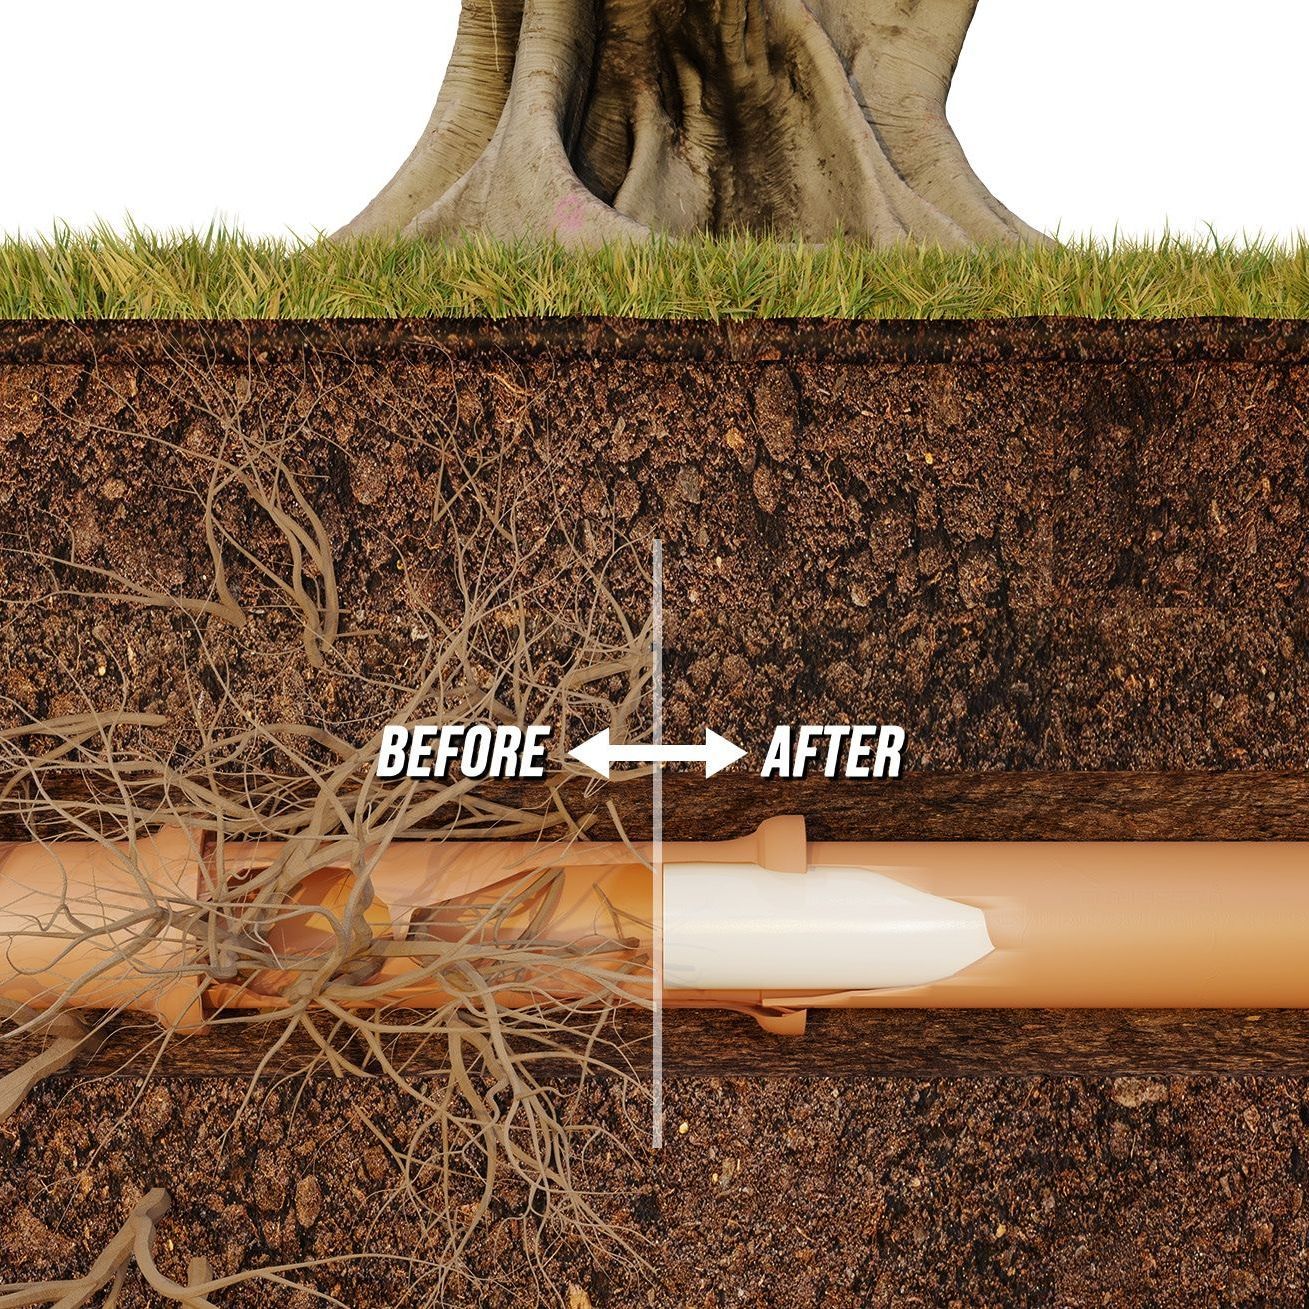 Before and After Sewer Line Repair | Pipe Repairs in Lancaster, PA